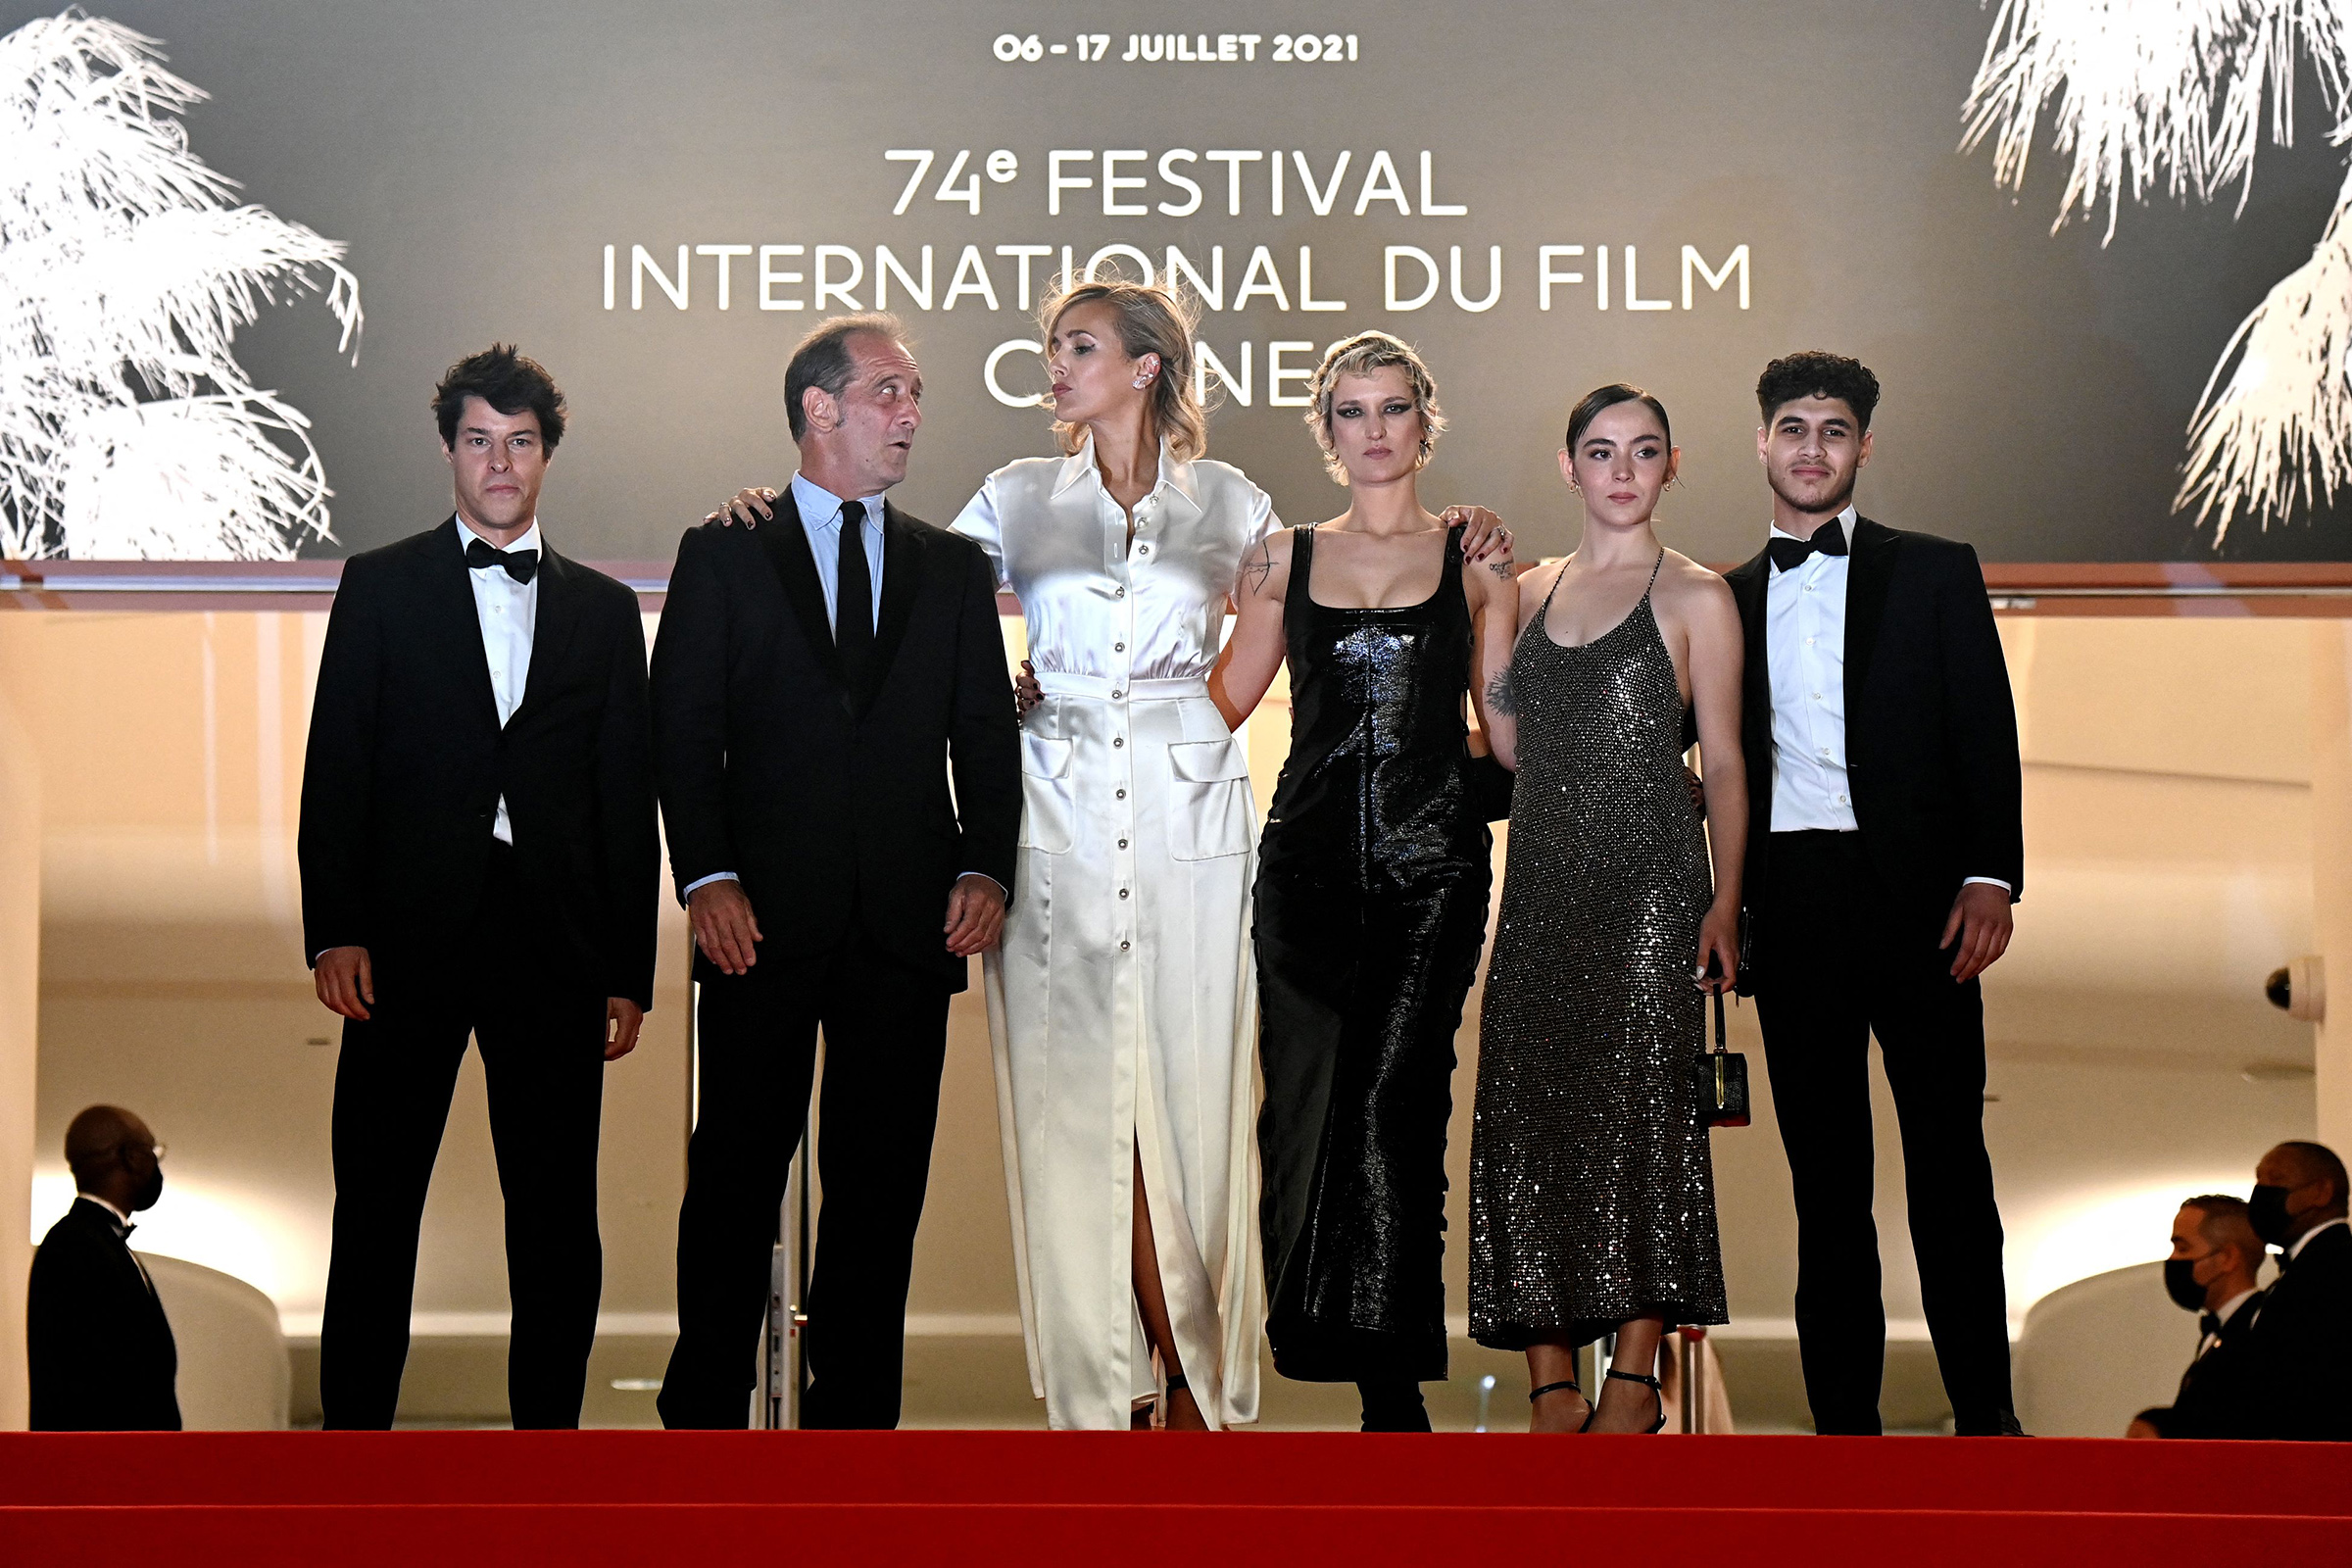 The Best Films and Performances From the 2021 Cannes Film Festival